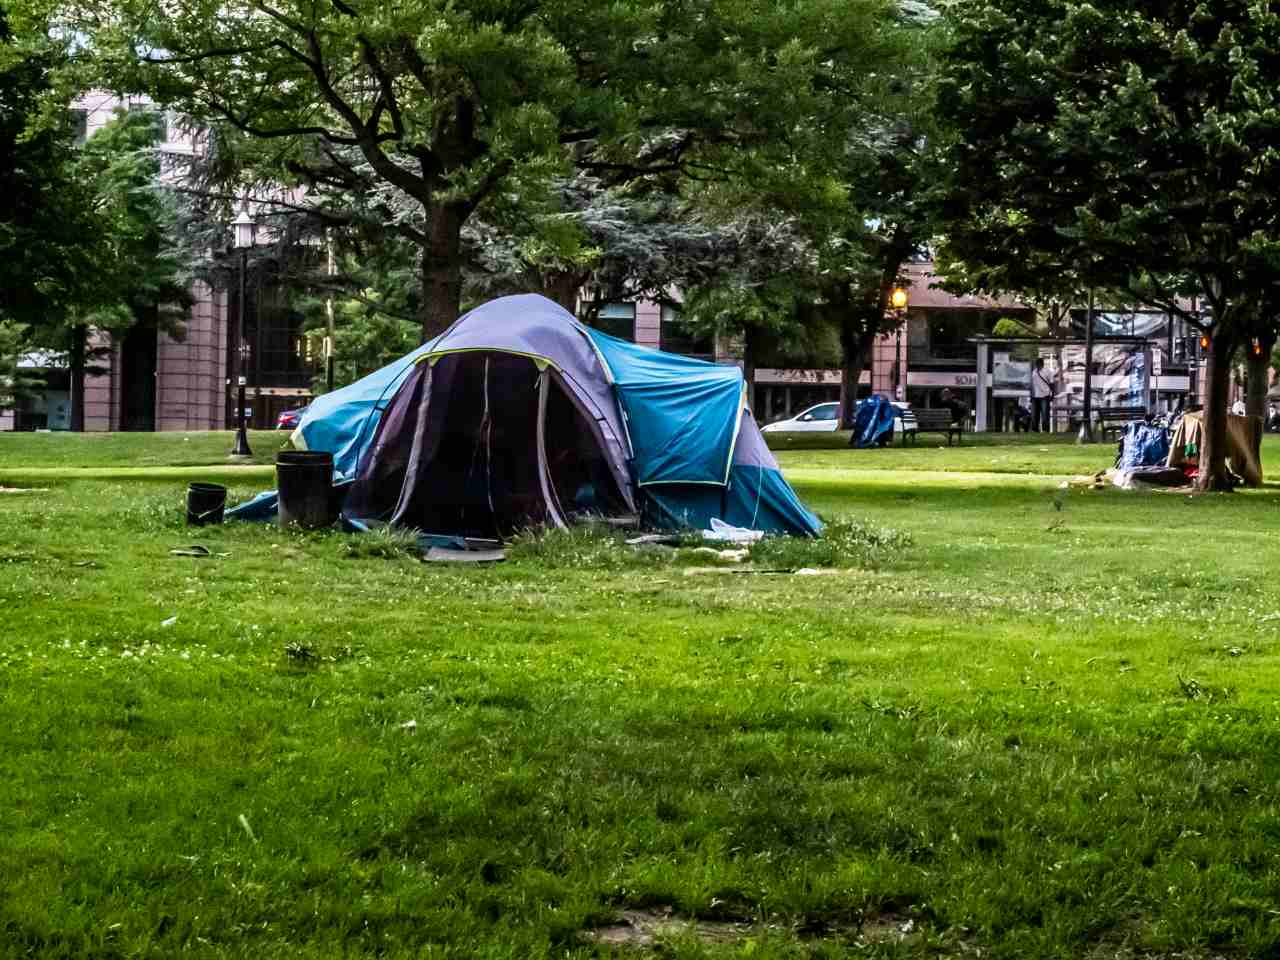 Photo of a large multi-person tent in the foreground and a smaller tent off in the distance.